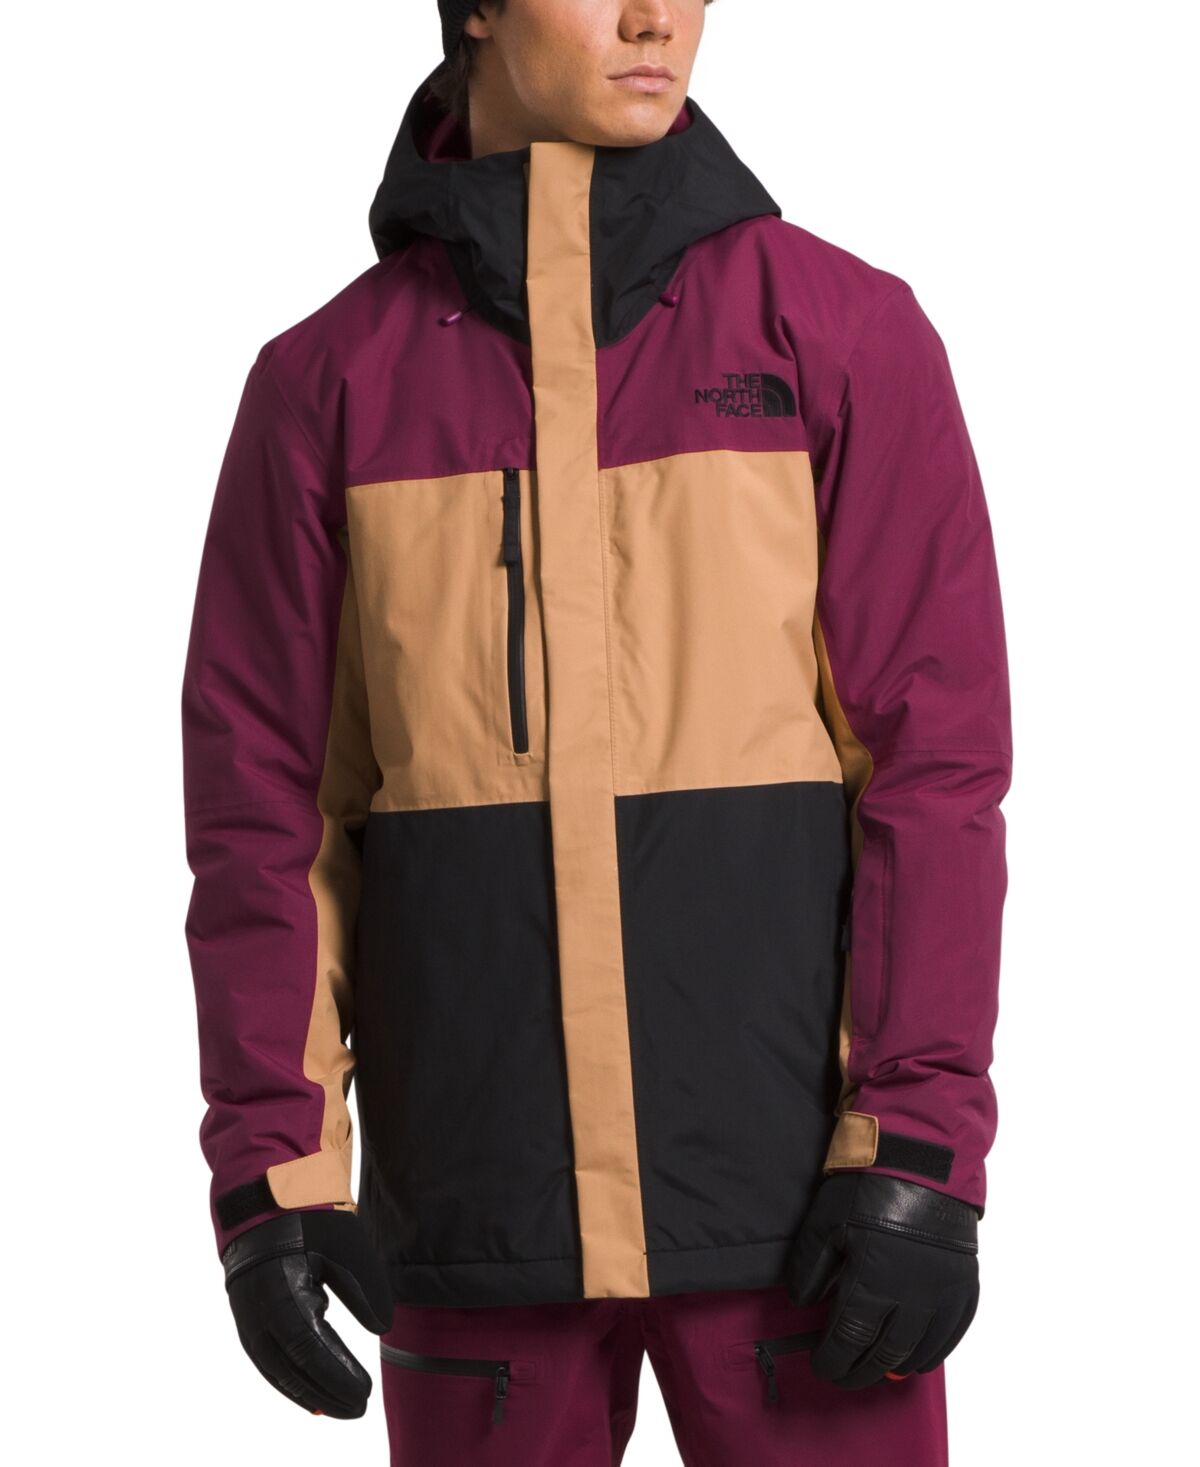 The North Face Men's Freedom Waterproof Full-Zip Insulated Jacket - Bysnbry/almdbtr